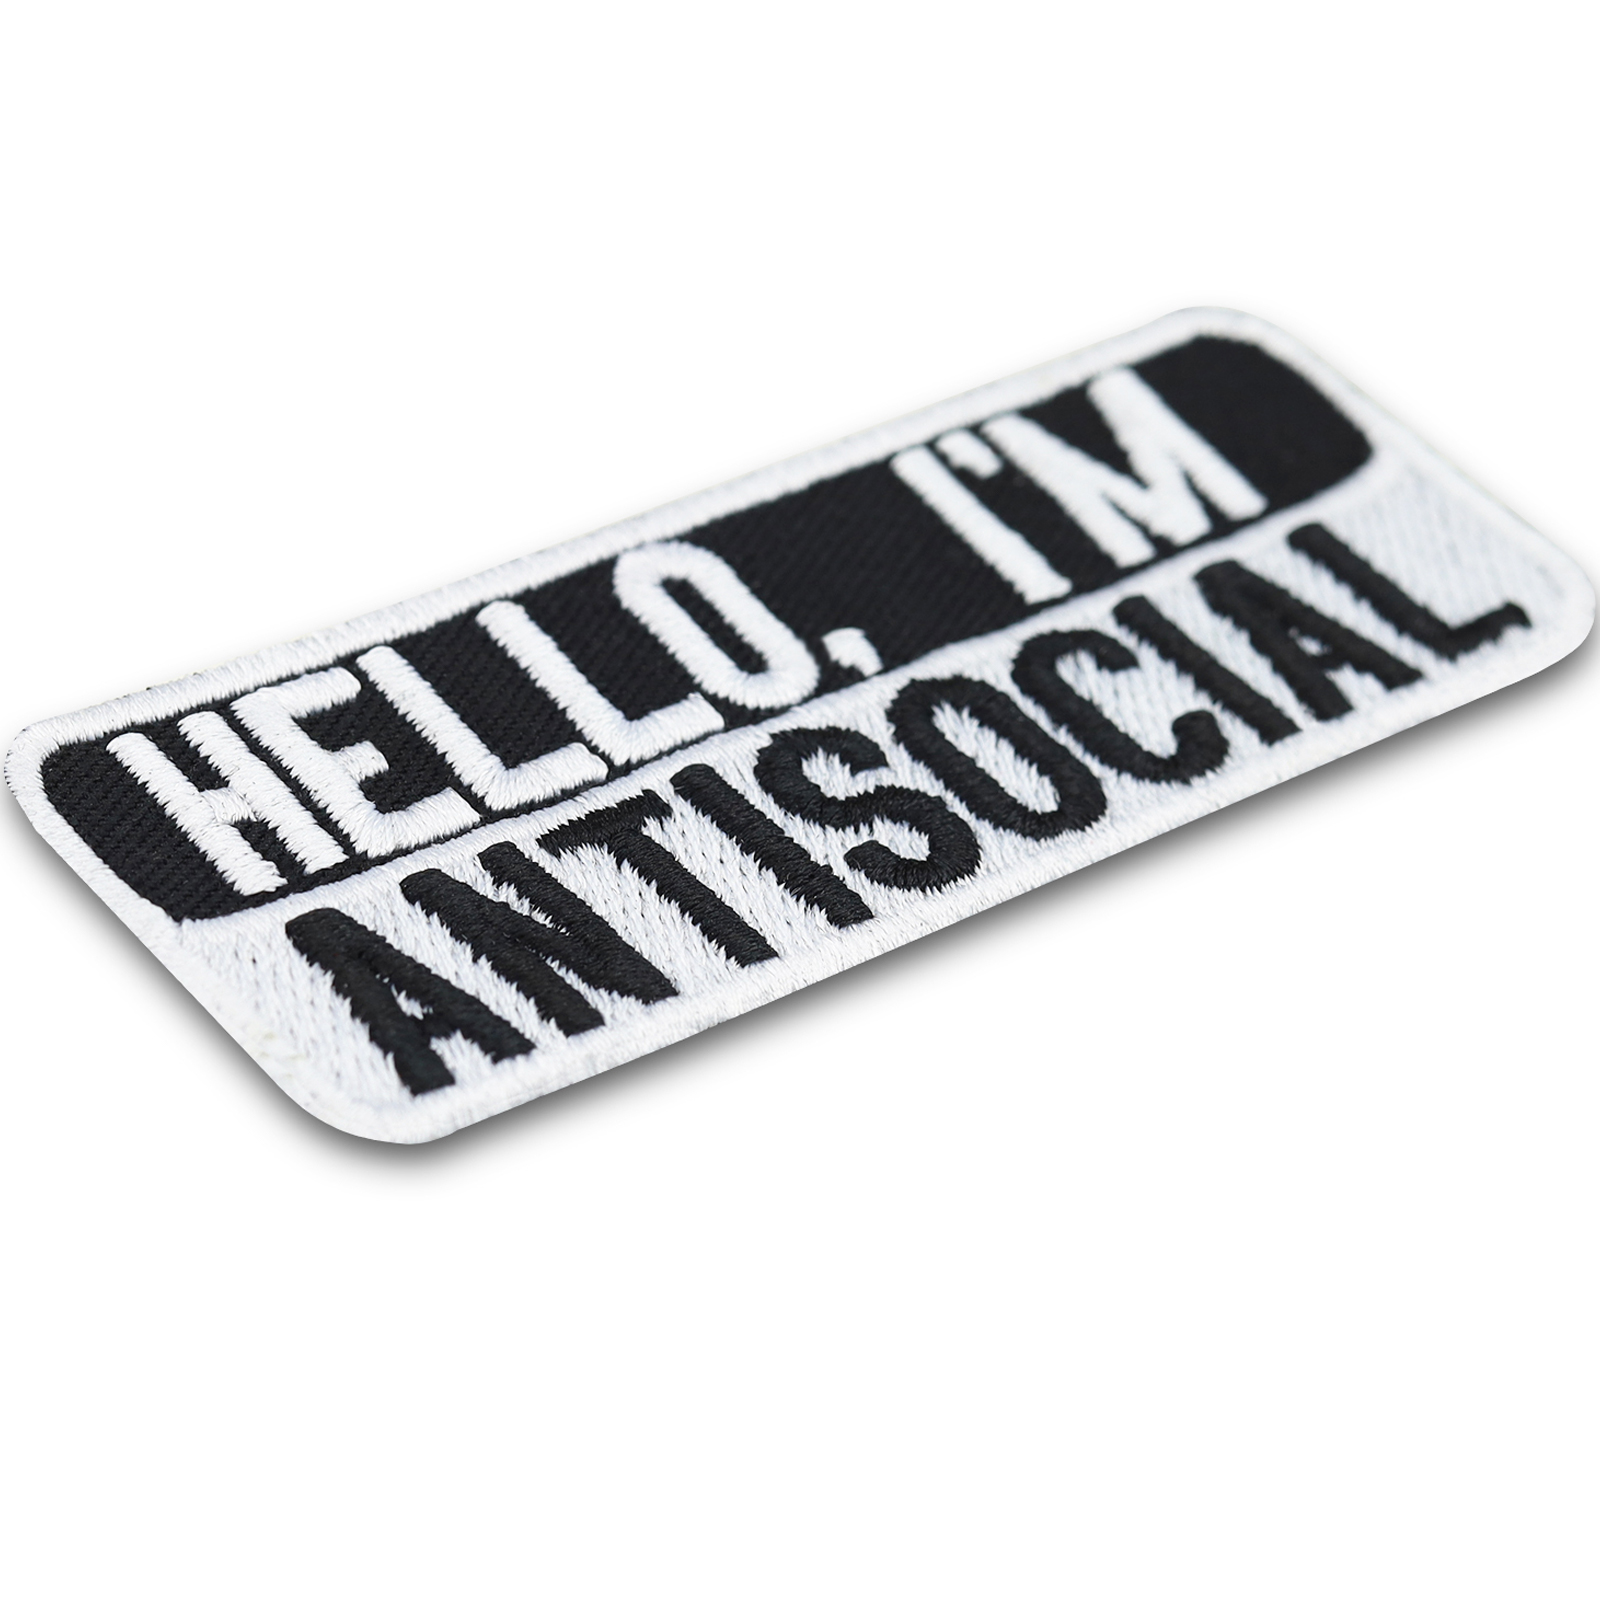 Hello. I'm antisocial. - Patch